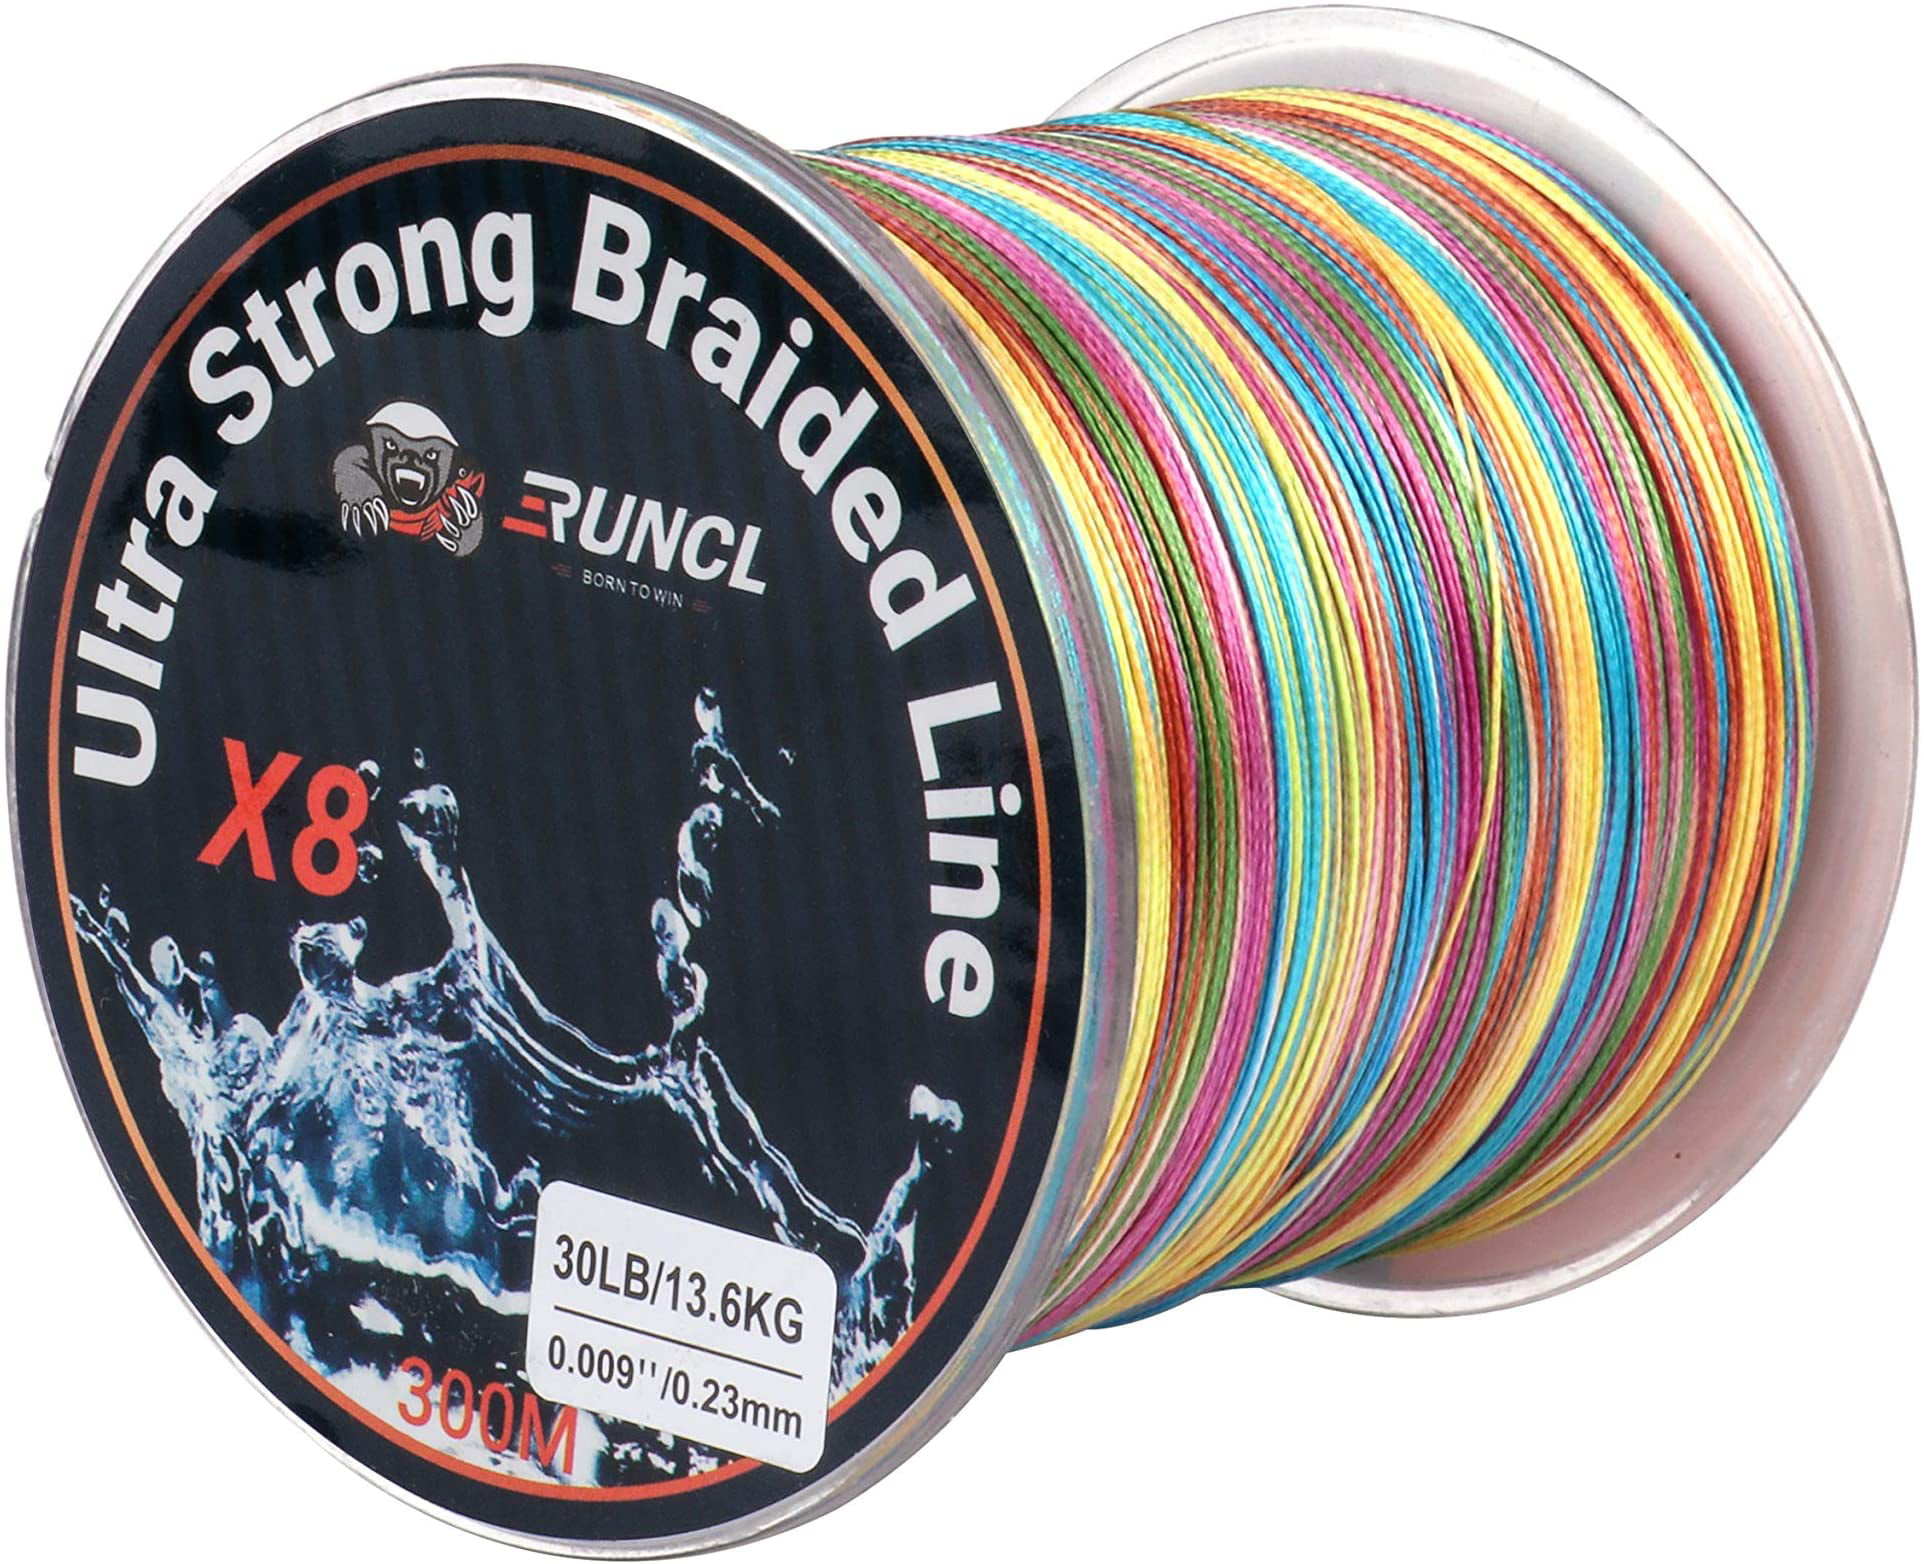 long durability 0.28mm 11 Ibs 1000m Grey TOP LINE The Top Carp Line with season